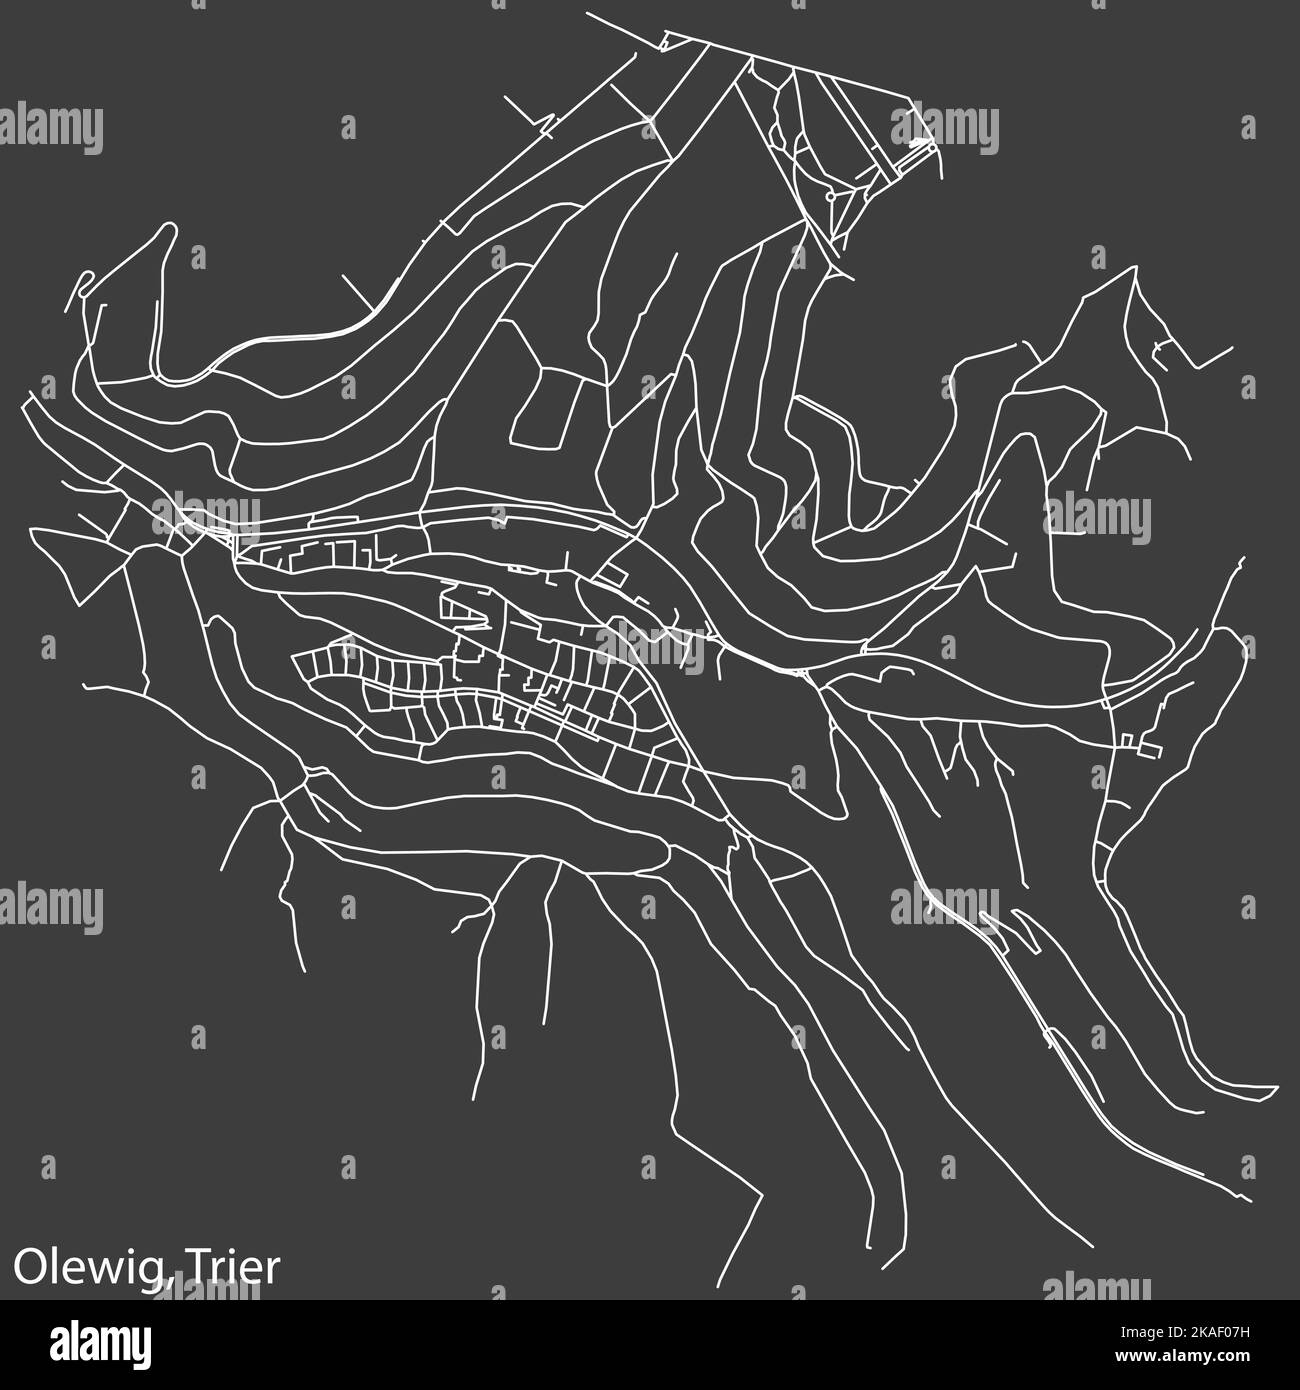 Street roads map of the OLEWIG MUNICIPALITY, TRIER Stock Vector